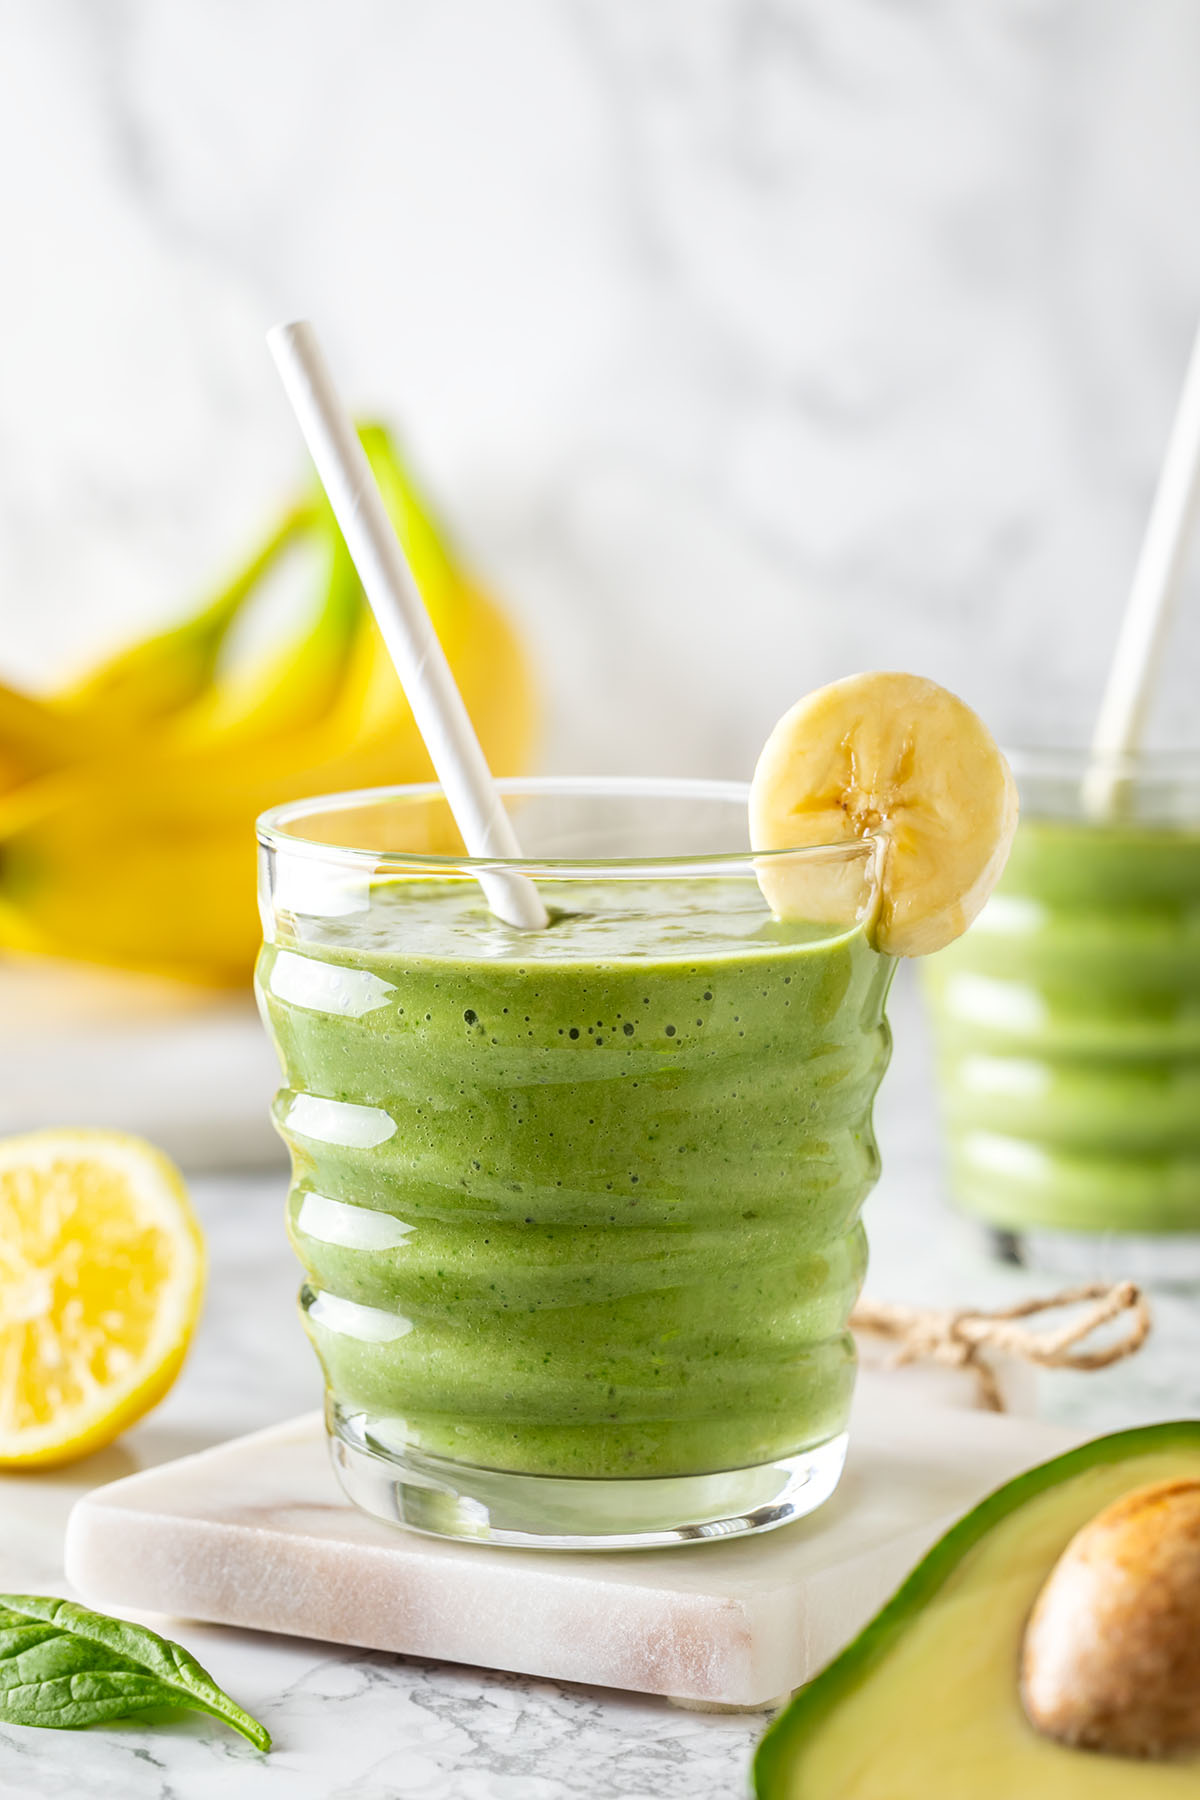 Avocado banana peanut butter smoothie decorated with a slice of banana